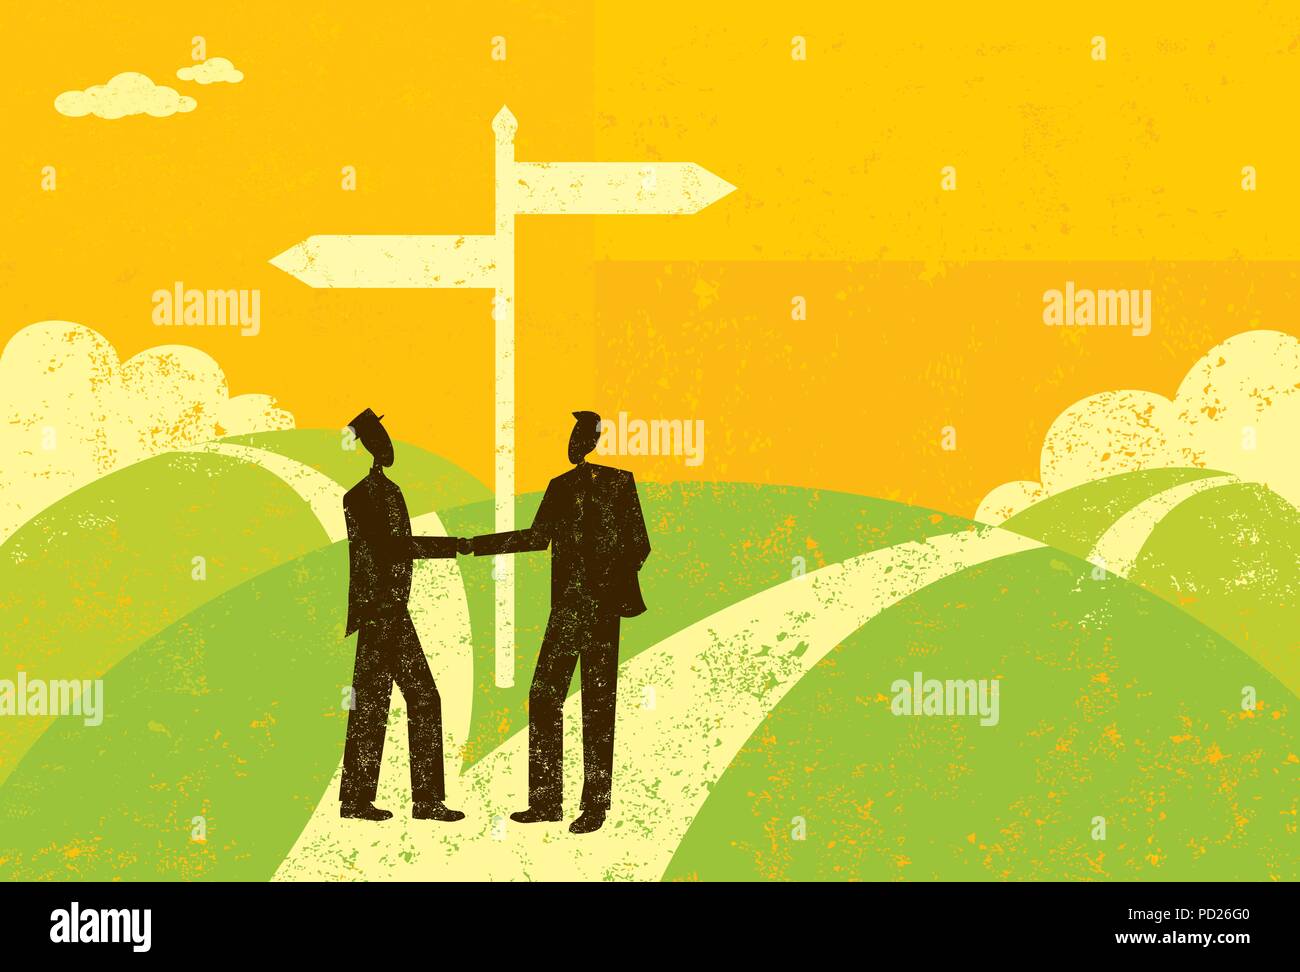 Businessmen Parting Ways Two business partners, reaching a fork in the road, shake hands and decide to part ways. Stock Vector